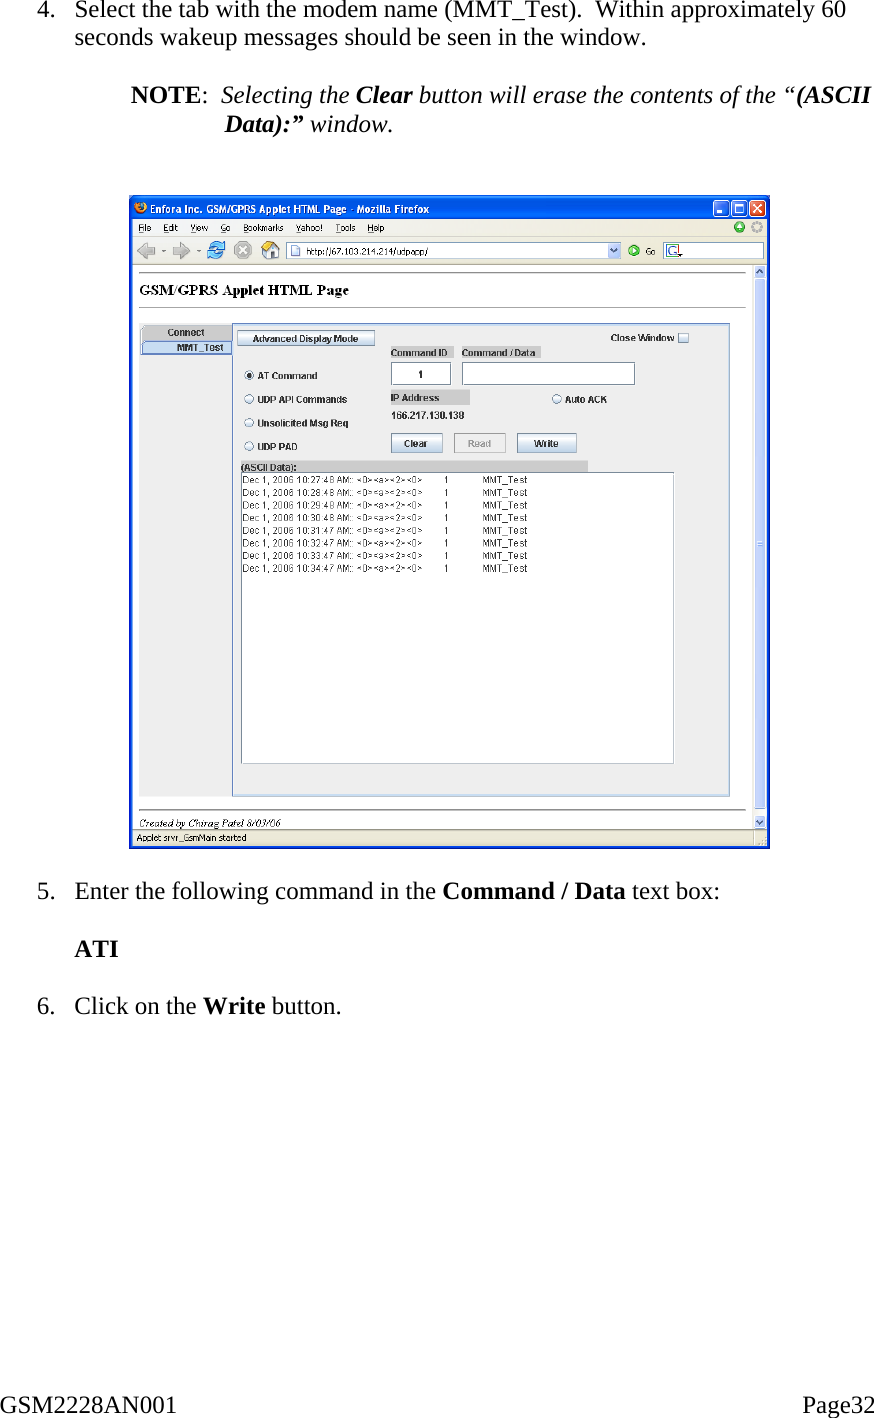  4.  Select the tab with the modem name (MMT_Test).  Within approximately 60 seconds wakeup messages should be seen in the window.  NOTE:  Selecting the Clear button will erase the contents of the “(ASCII Data):” window.     5.  Enter the following command in the Command / Data text box:   ATI  6.  Click on the Write button.   GSM2228AN001                                                                                                    Page32 